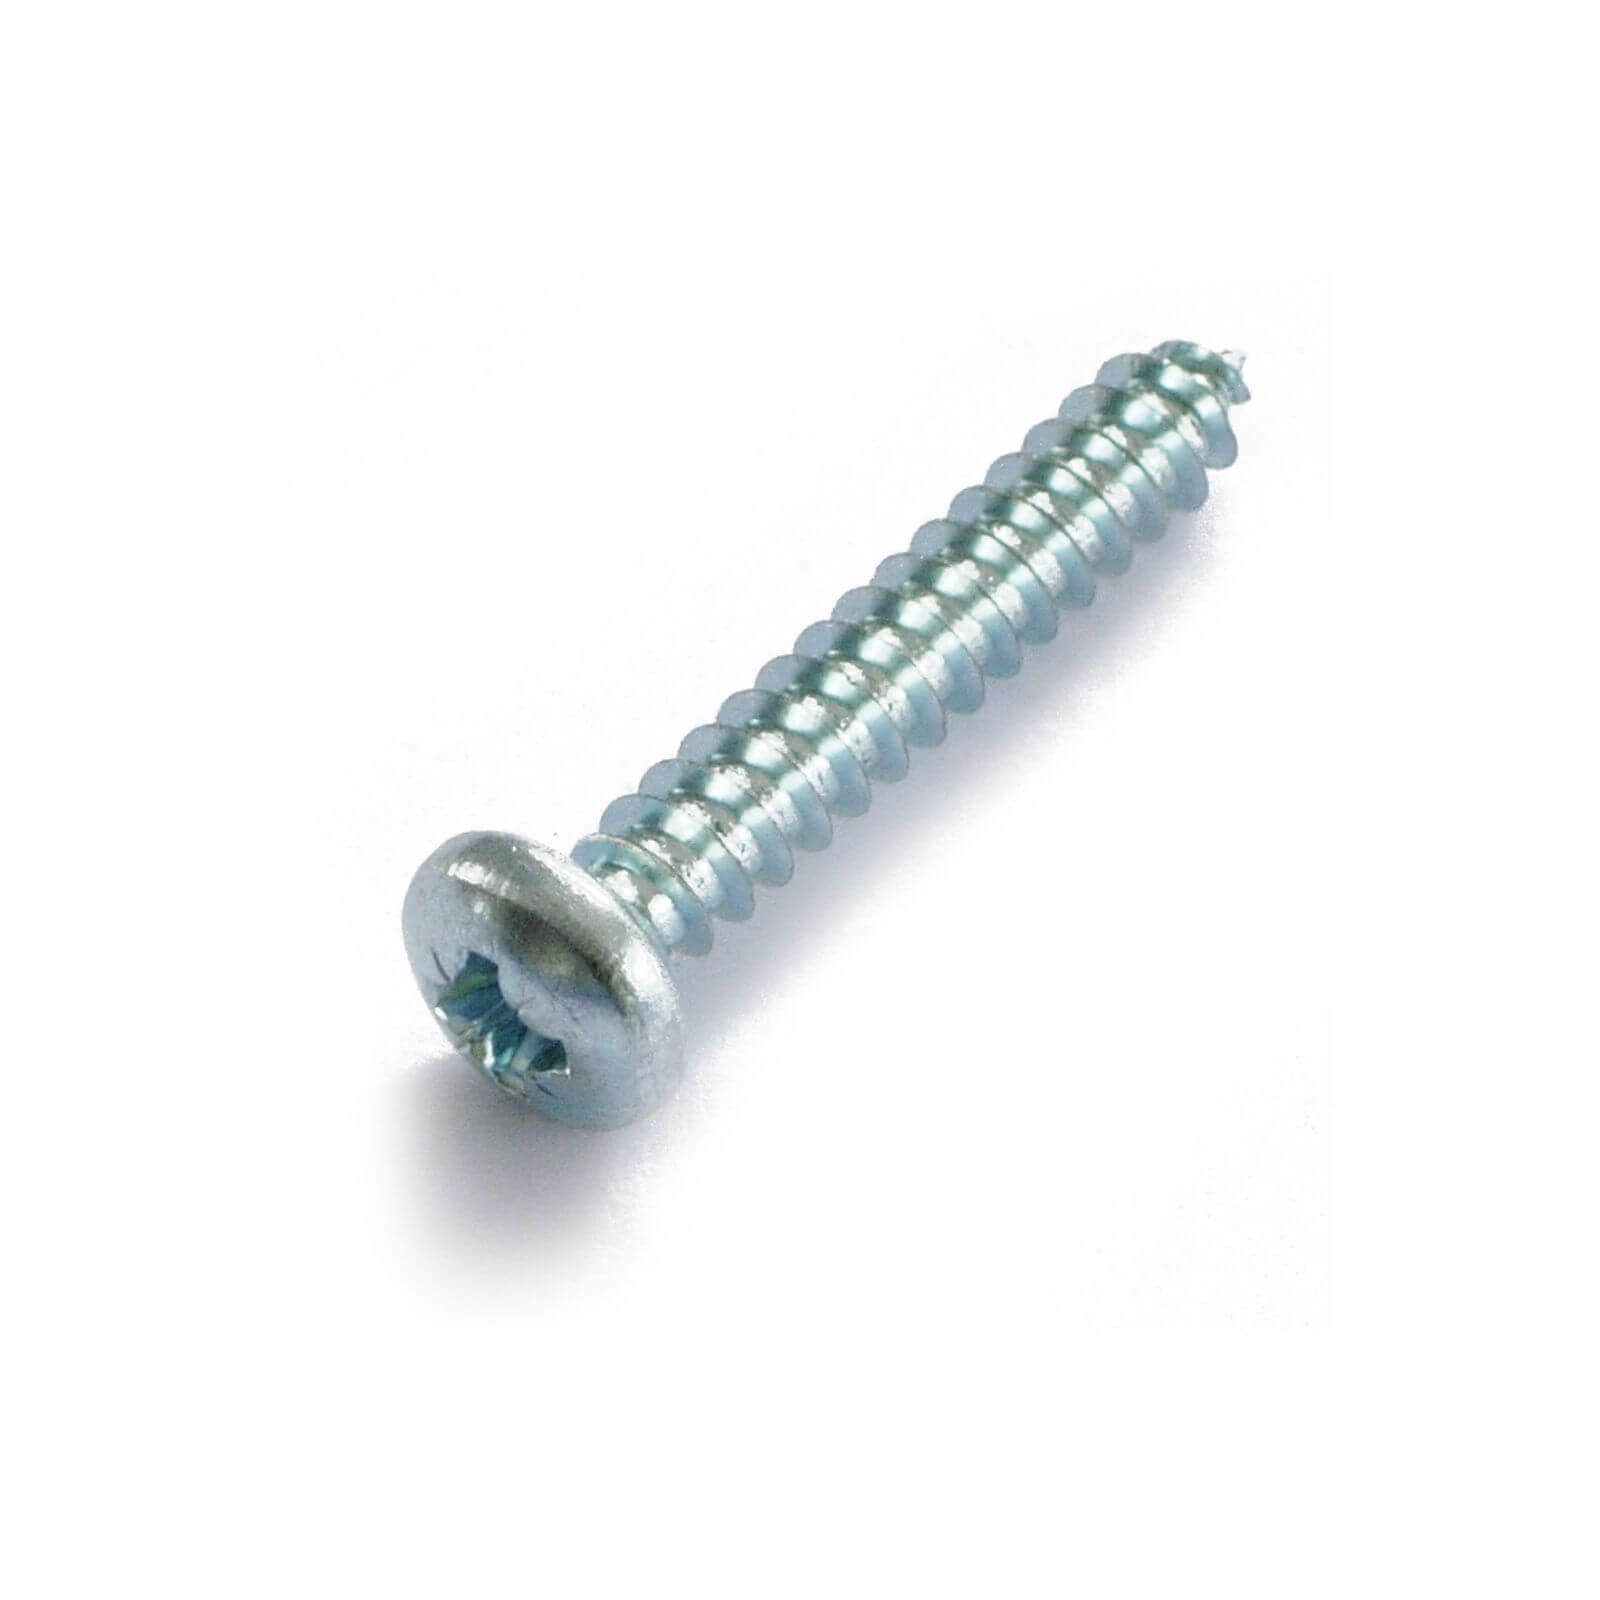 Self Tapping Screw - Bright Zinc Plated - 5 x 20mm - 10 Pack